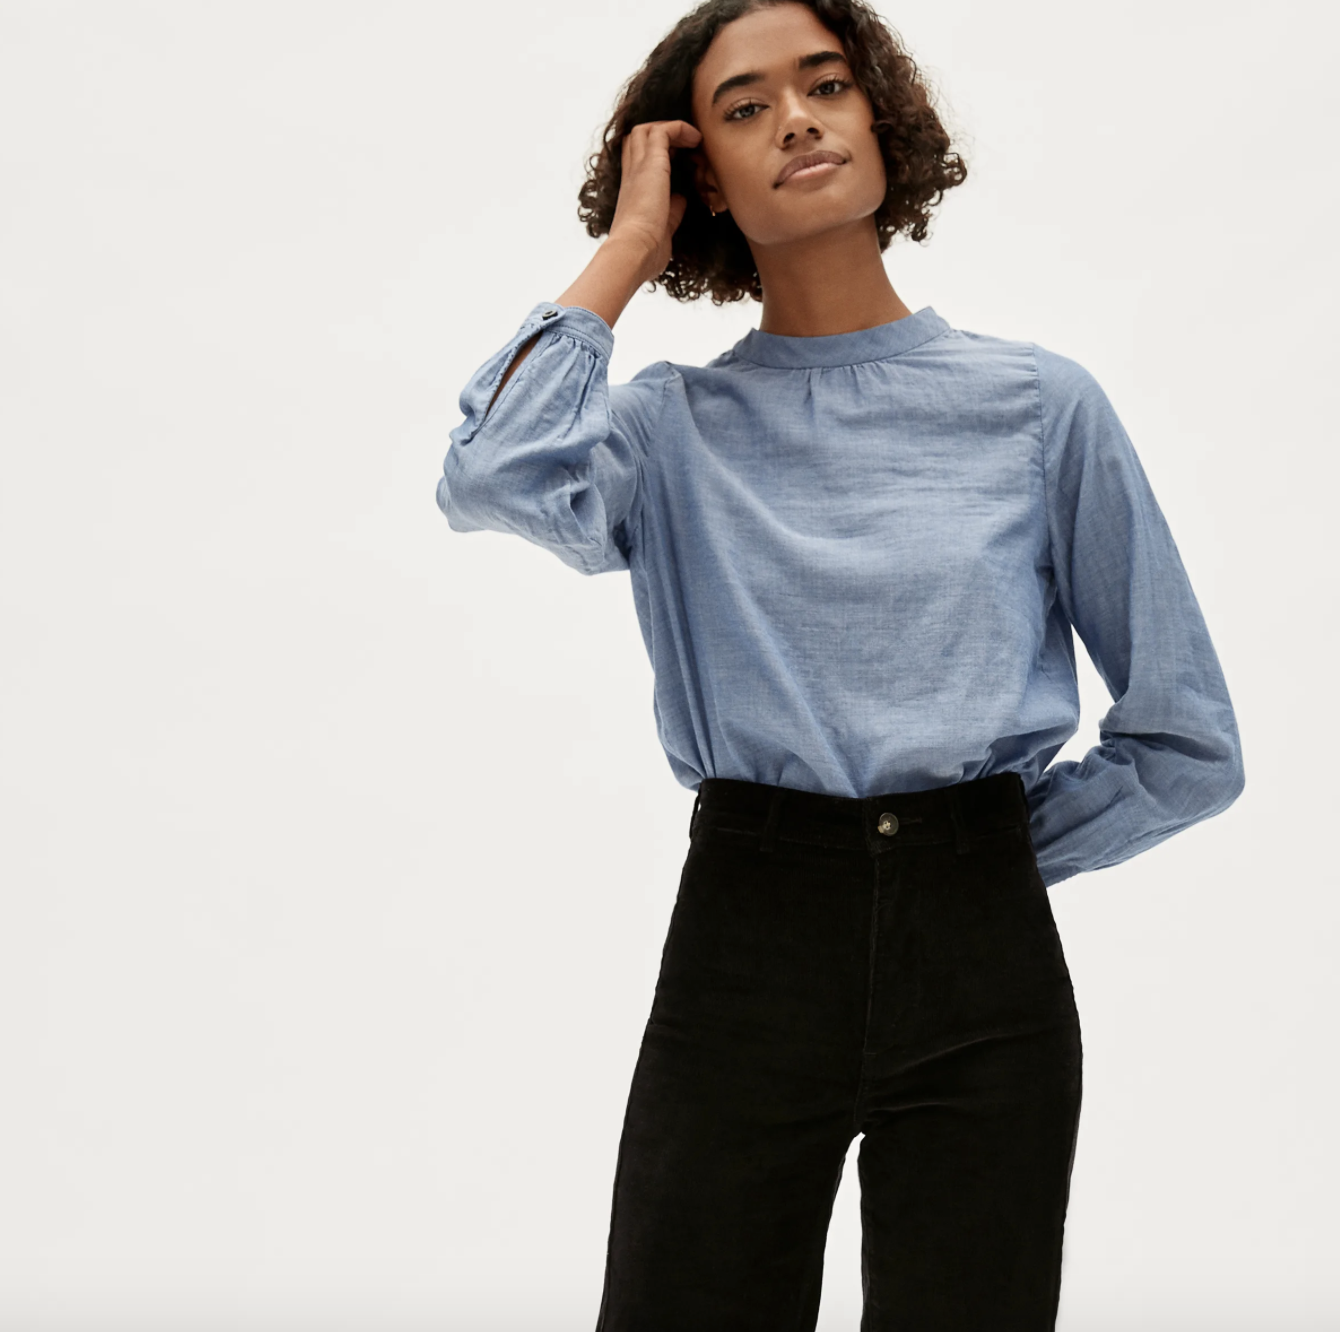 34 Tops That Are Perfect For Winter